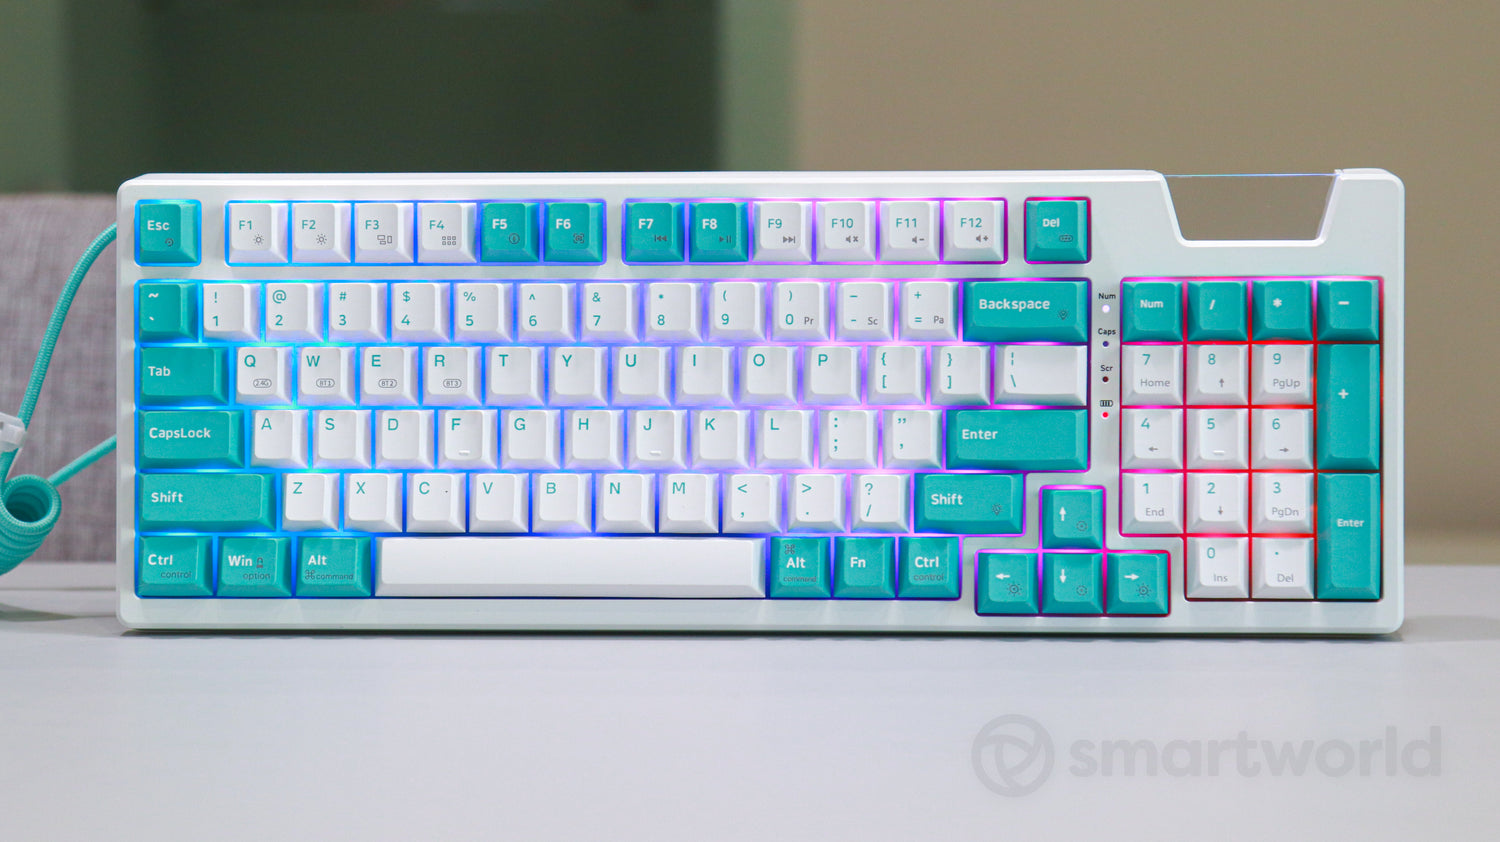 Marvo KG972W review: a pleasant surprise among many mechanical keyboards